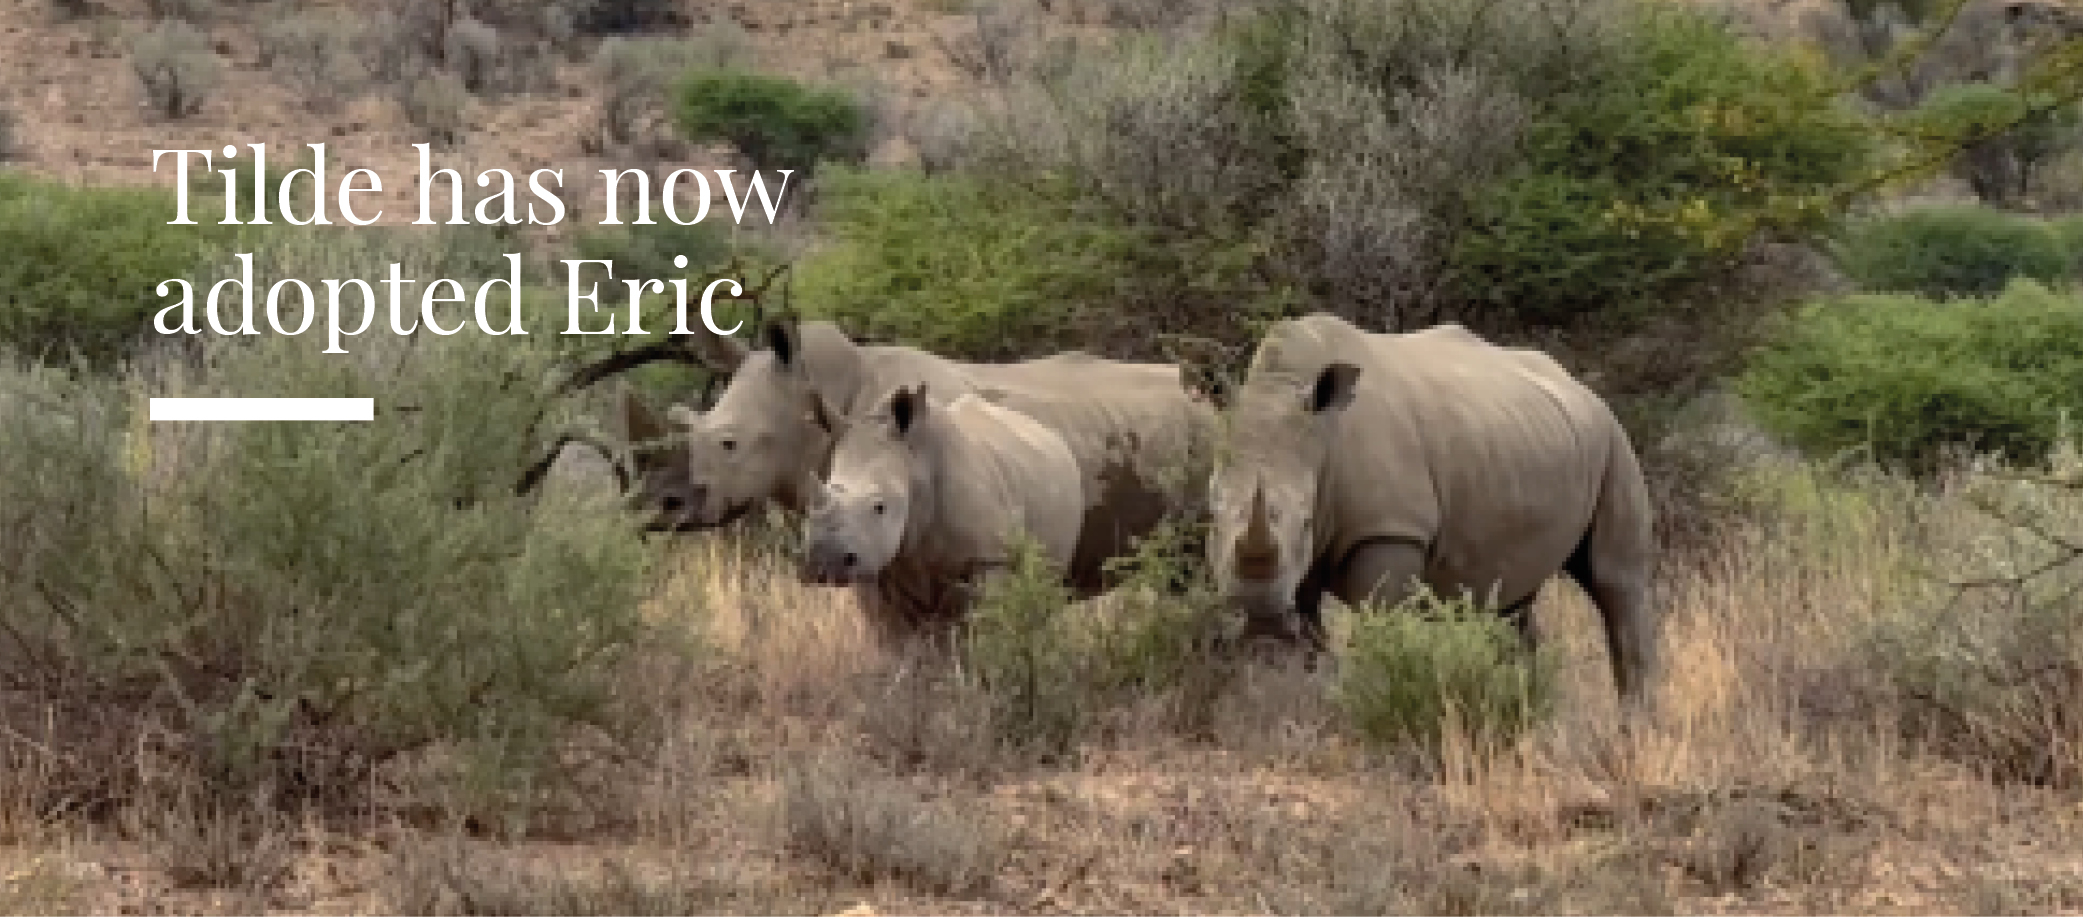 Tilde has adopted Eric, Beate's firstborn, into her rhino family alongside her own calf, Joanna.